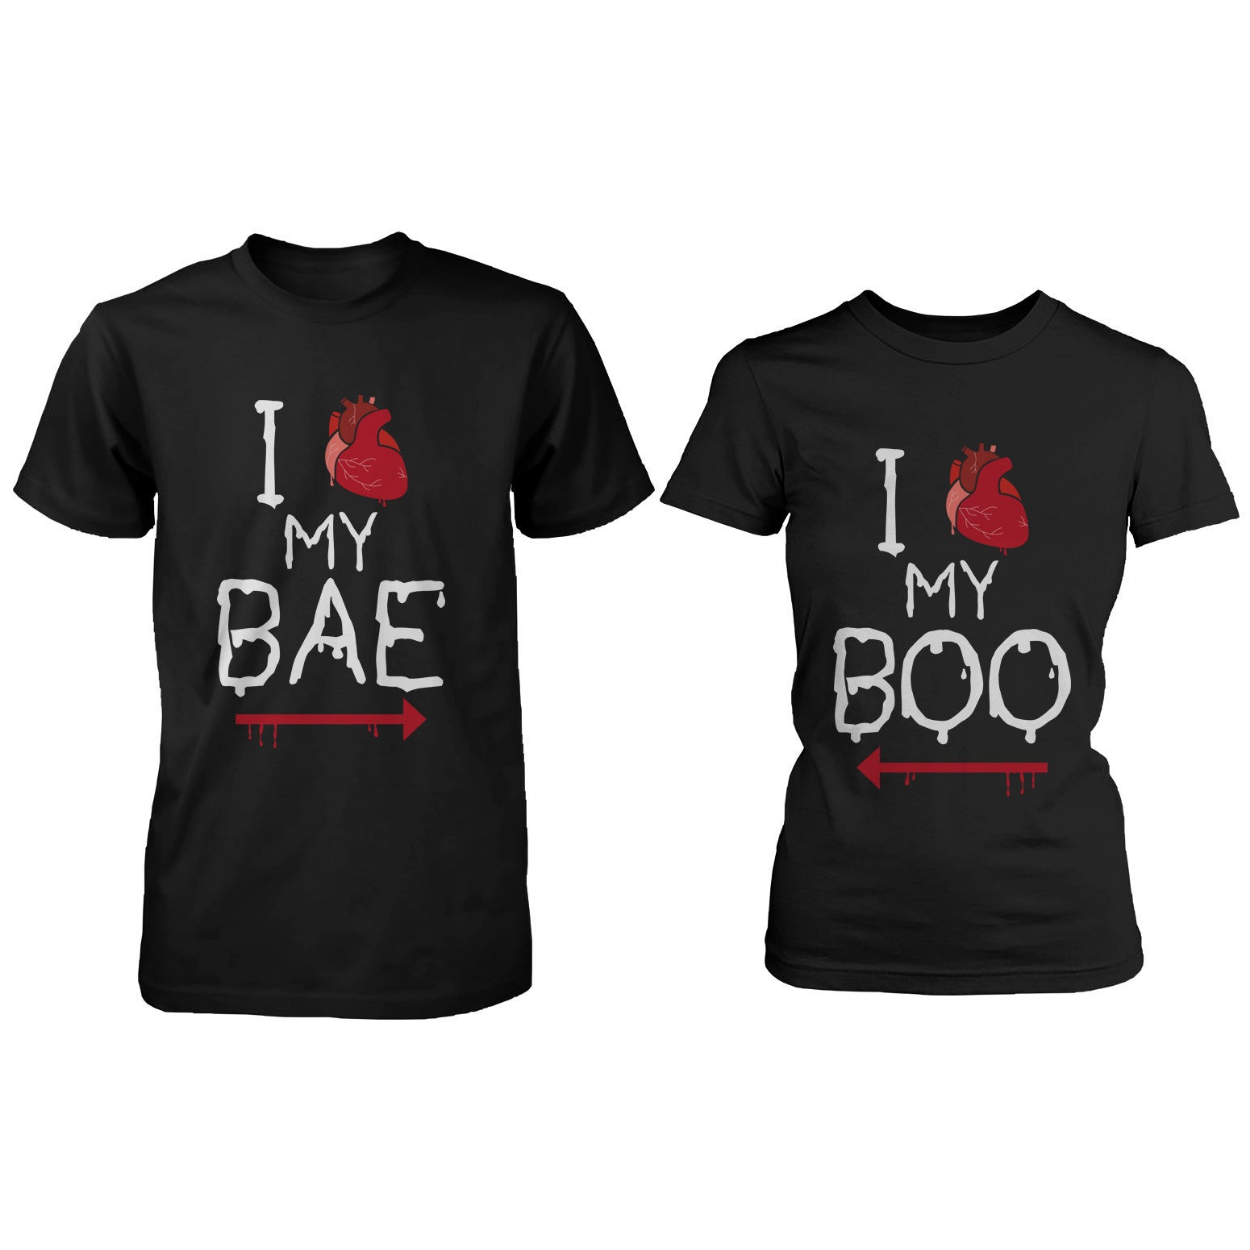 Couples Shirts Bae Shirts for Valentine's Day Matching Couple Shirt My Bae Shirt 